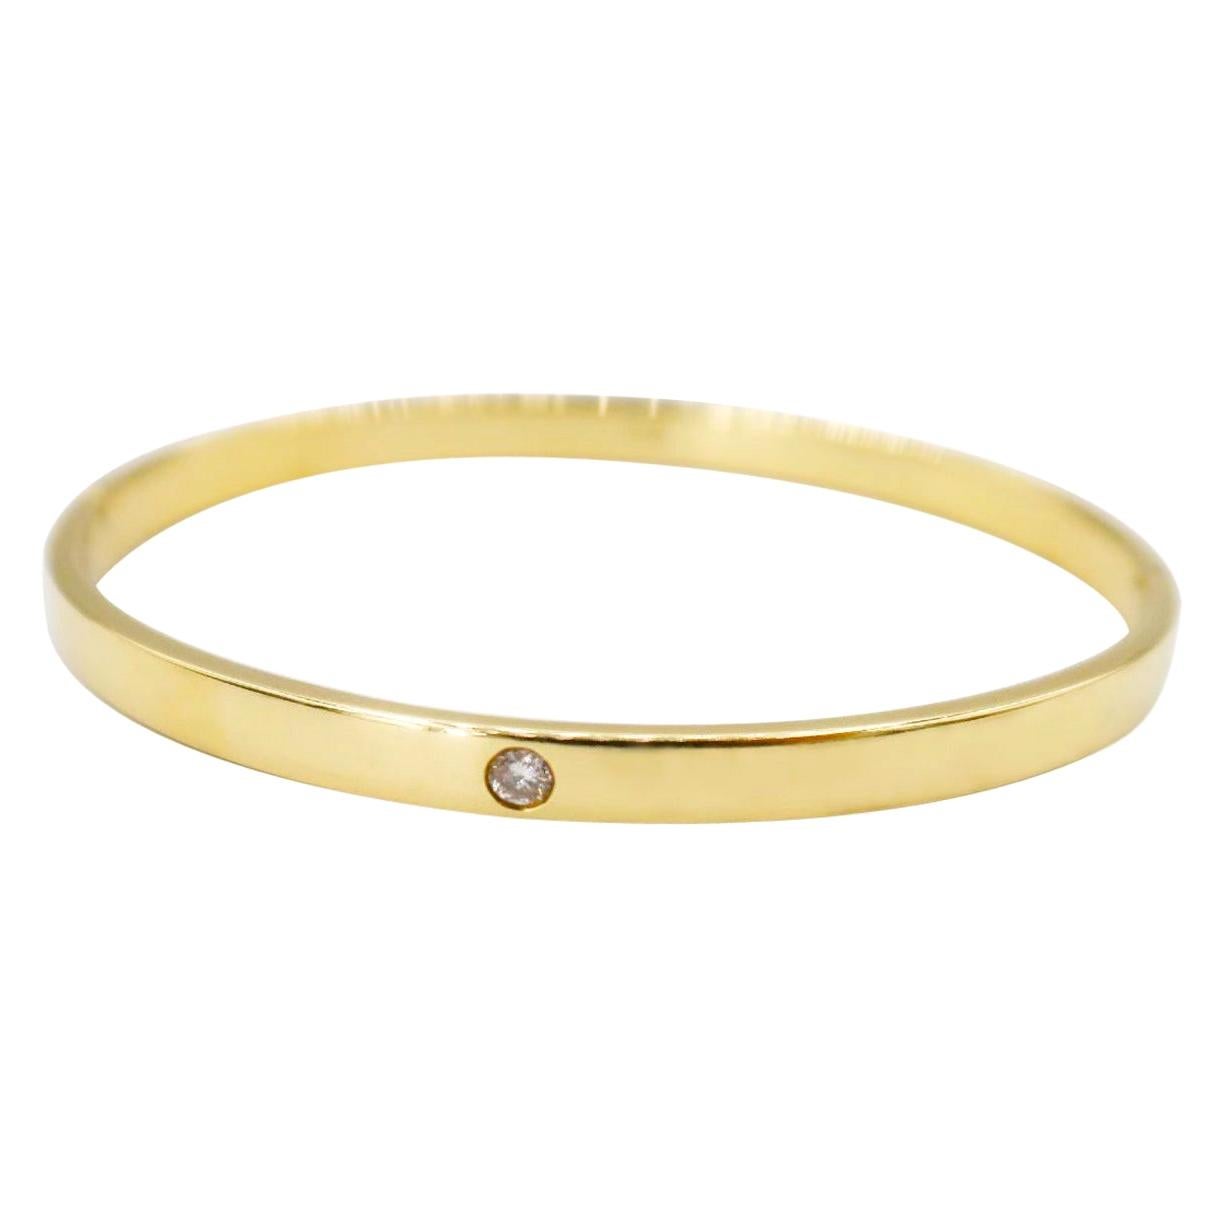 Endearing Baby Diamond Flat Shiny Bangle in 18k Yellow Gold For Sale